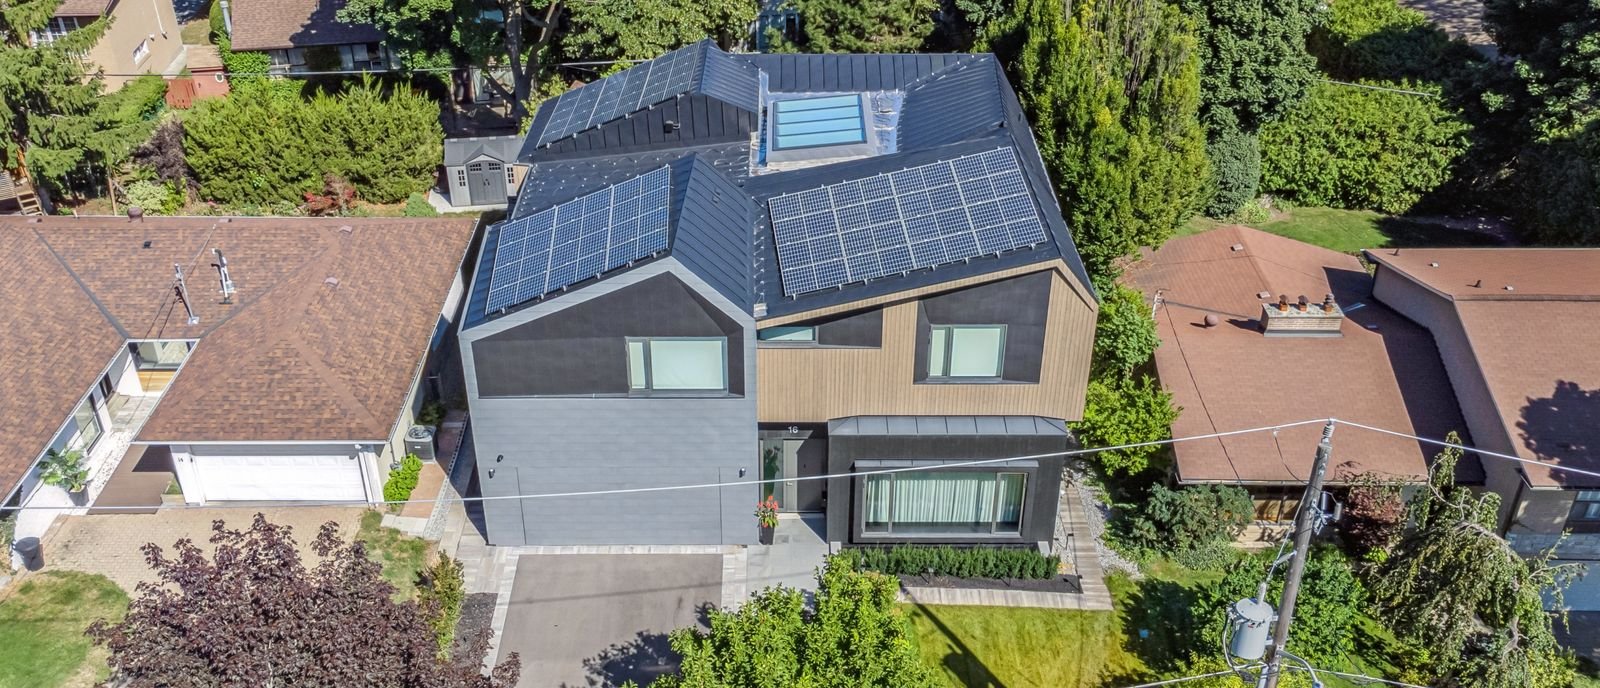 aerial rooftop modern zinc cladding with solar panels and skylight in home renovation